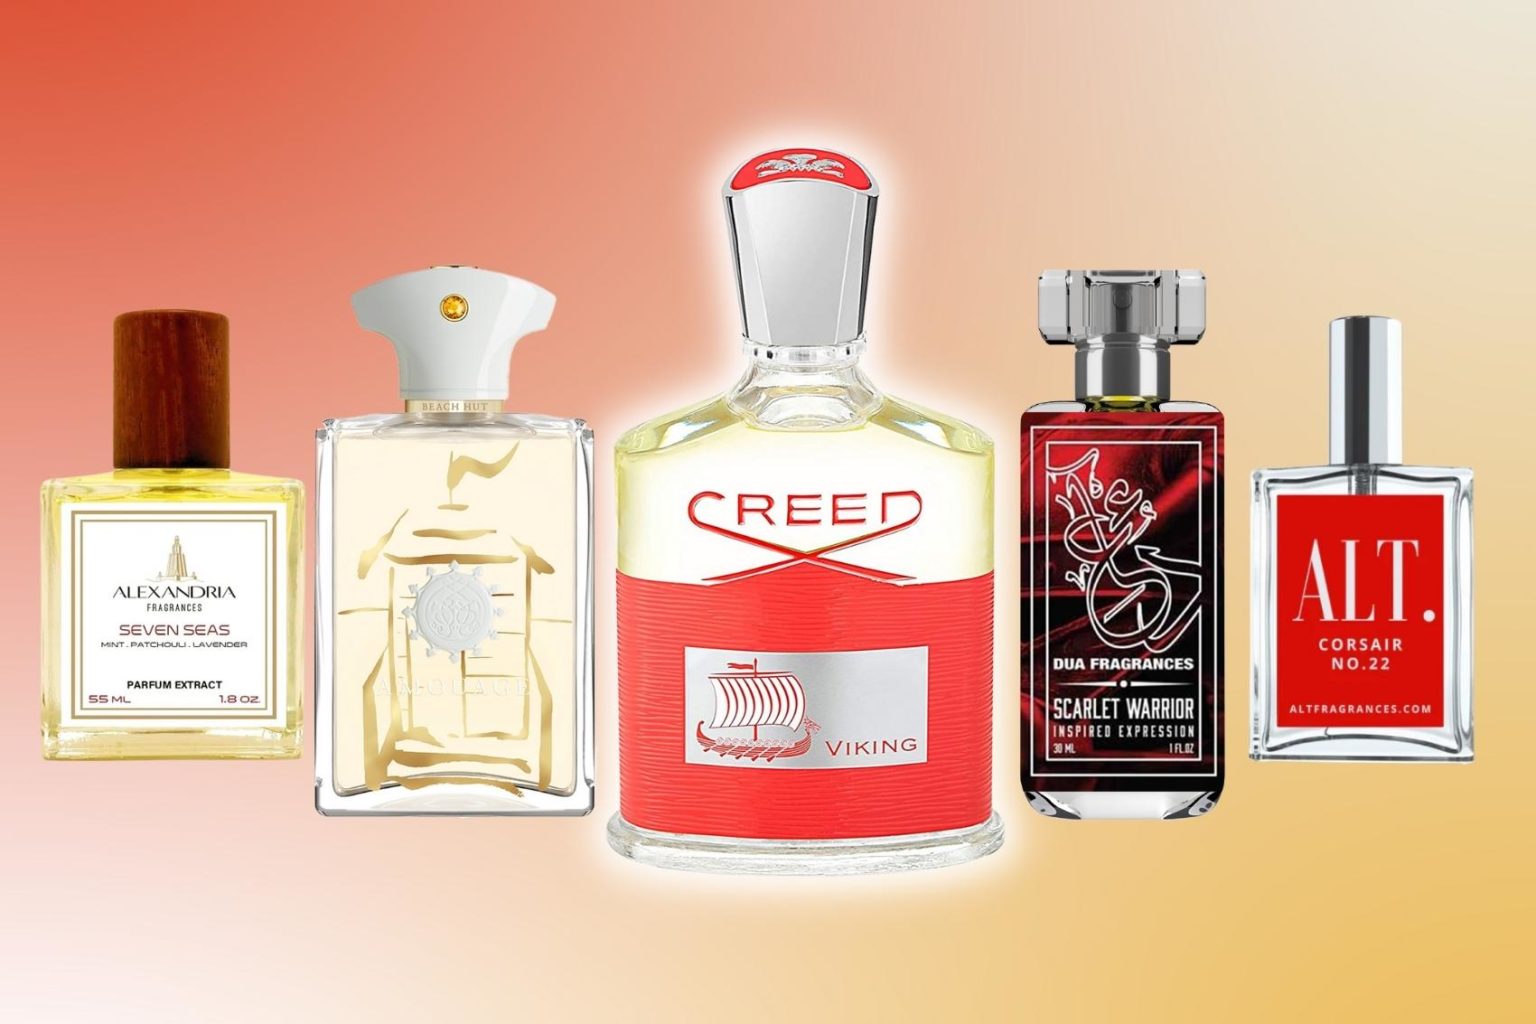 Creed Viking Clones: Here Are 10 To Try - FragranceReview.com